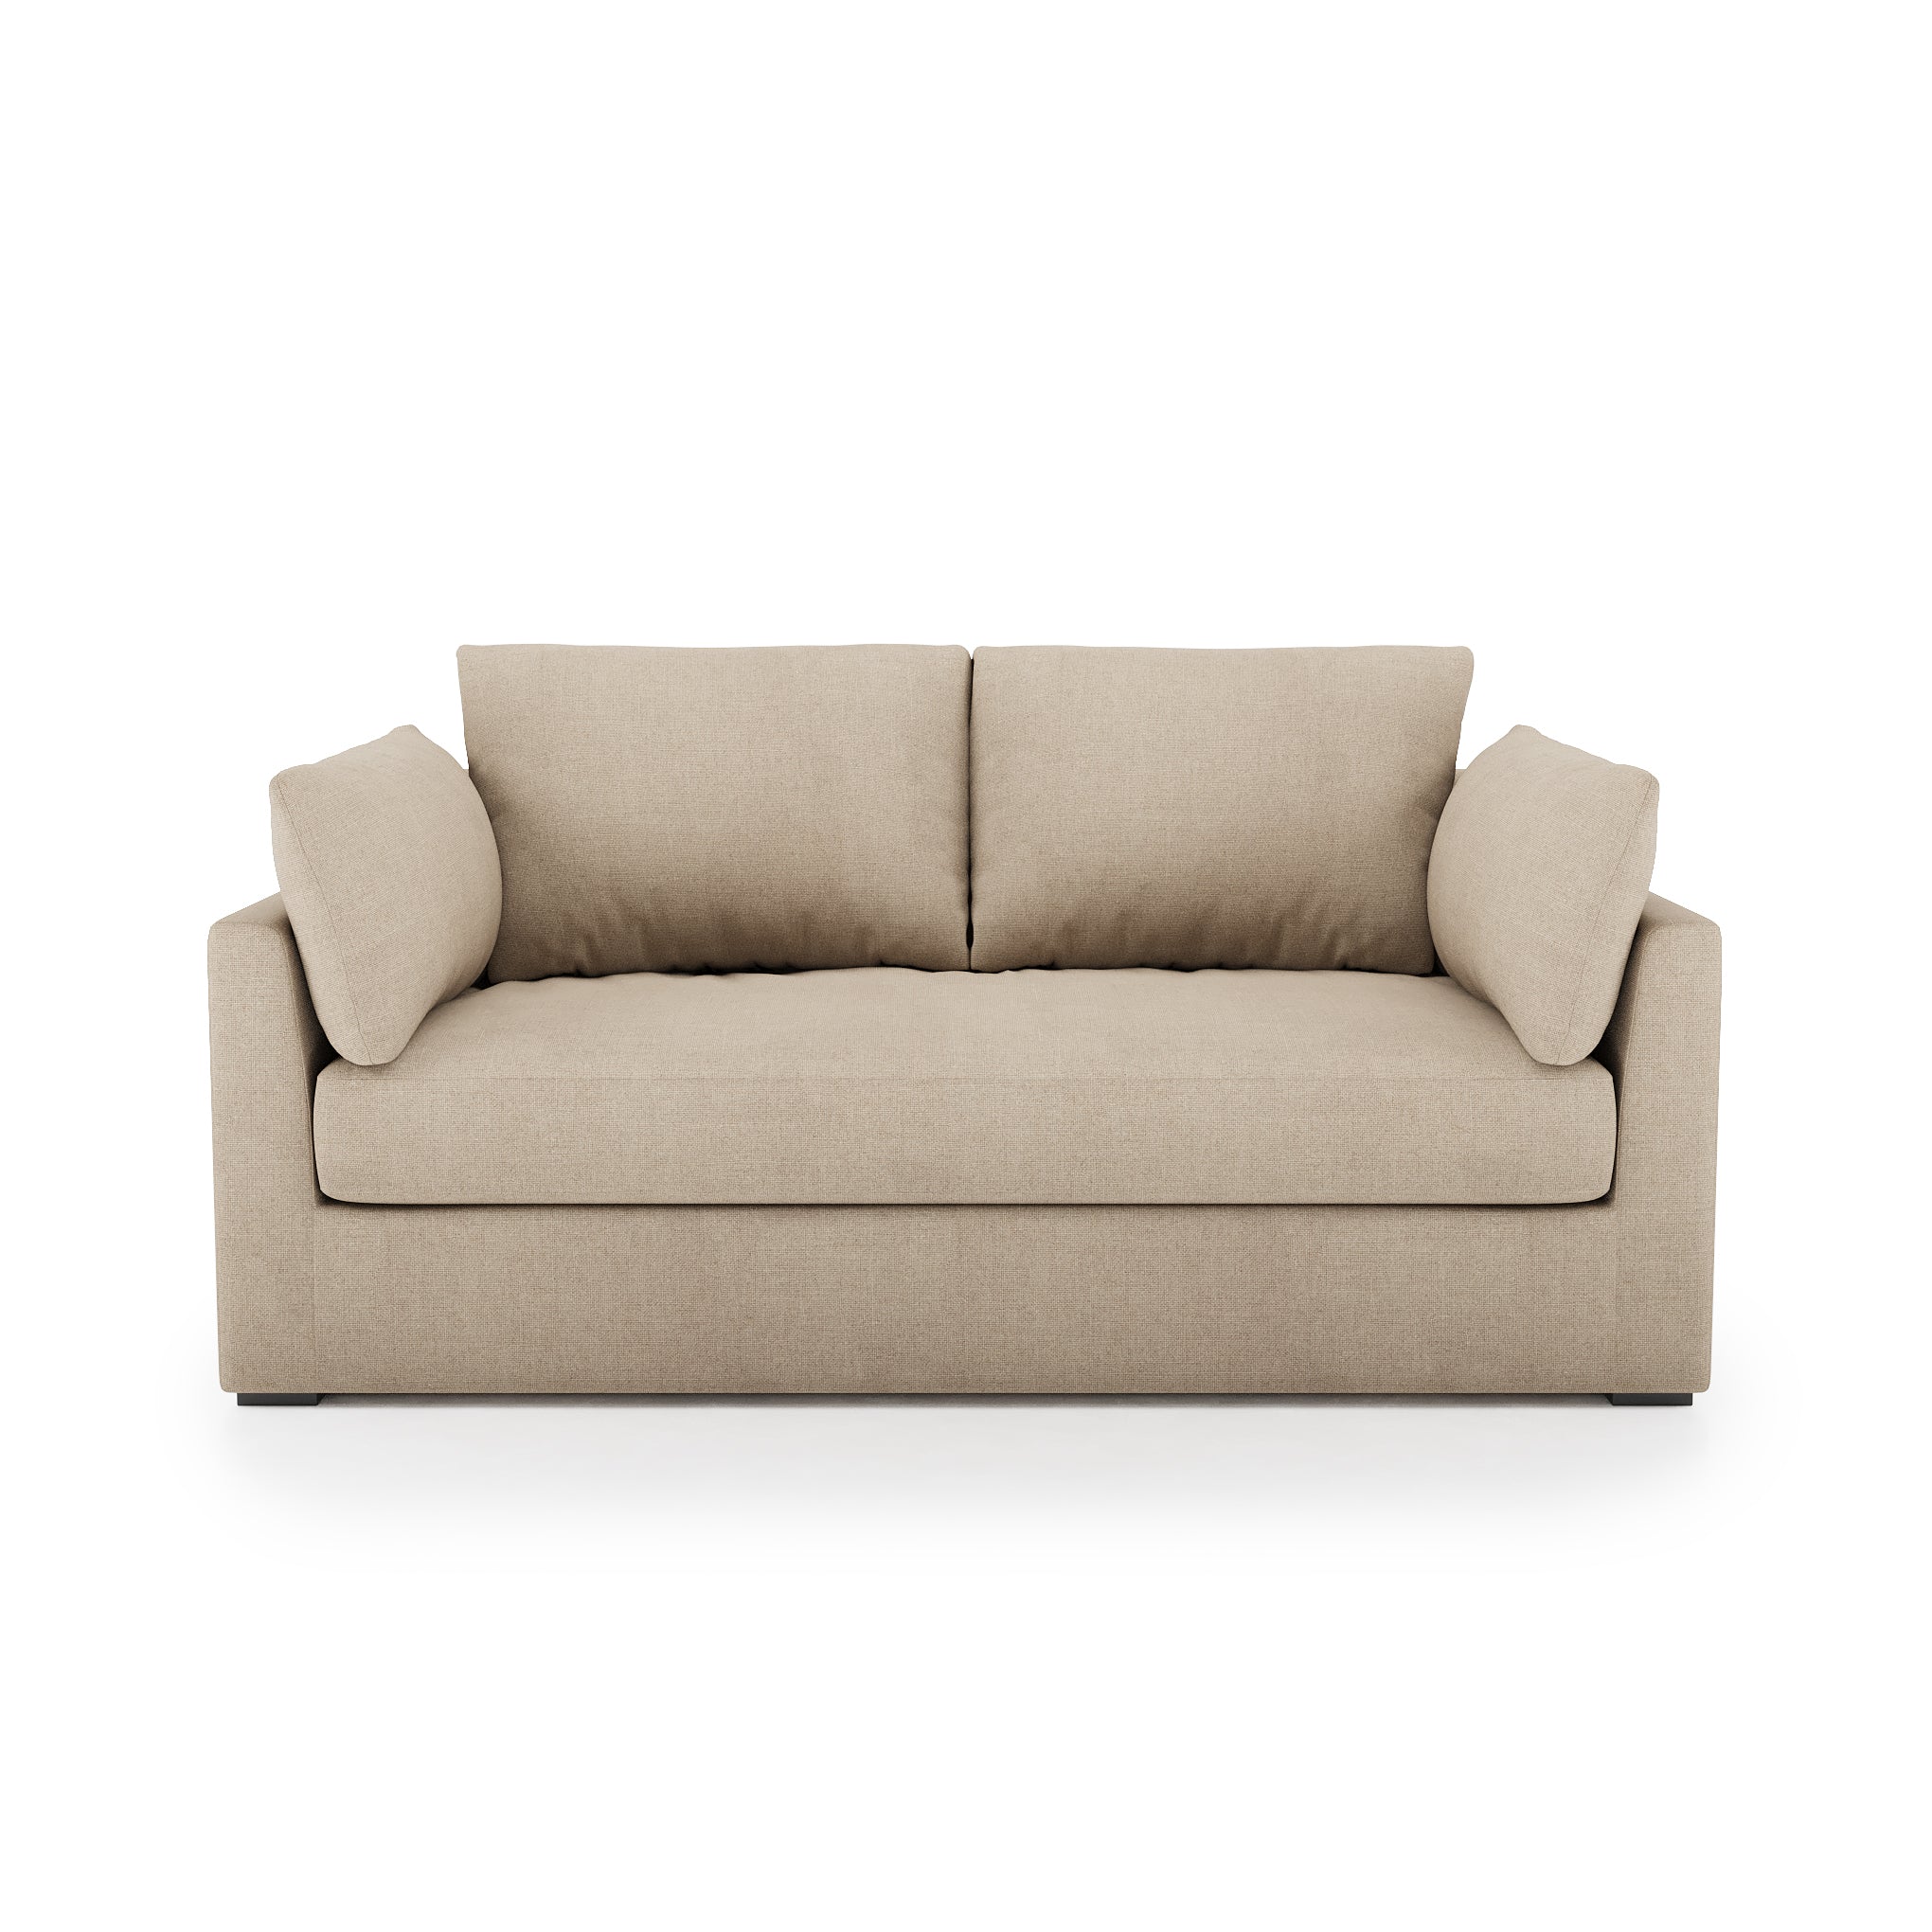 Serene Sofa natural linen front view On sale with items ranging from $2399.20 to $2799.20, discounted from $2999.00 to $3499.00